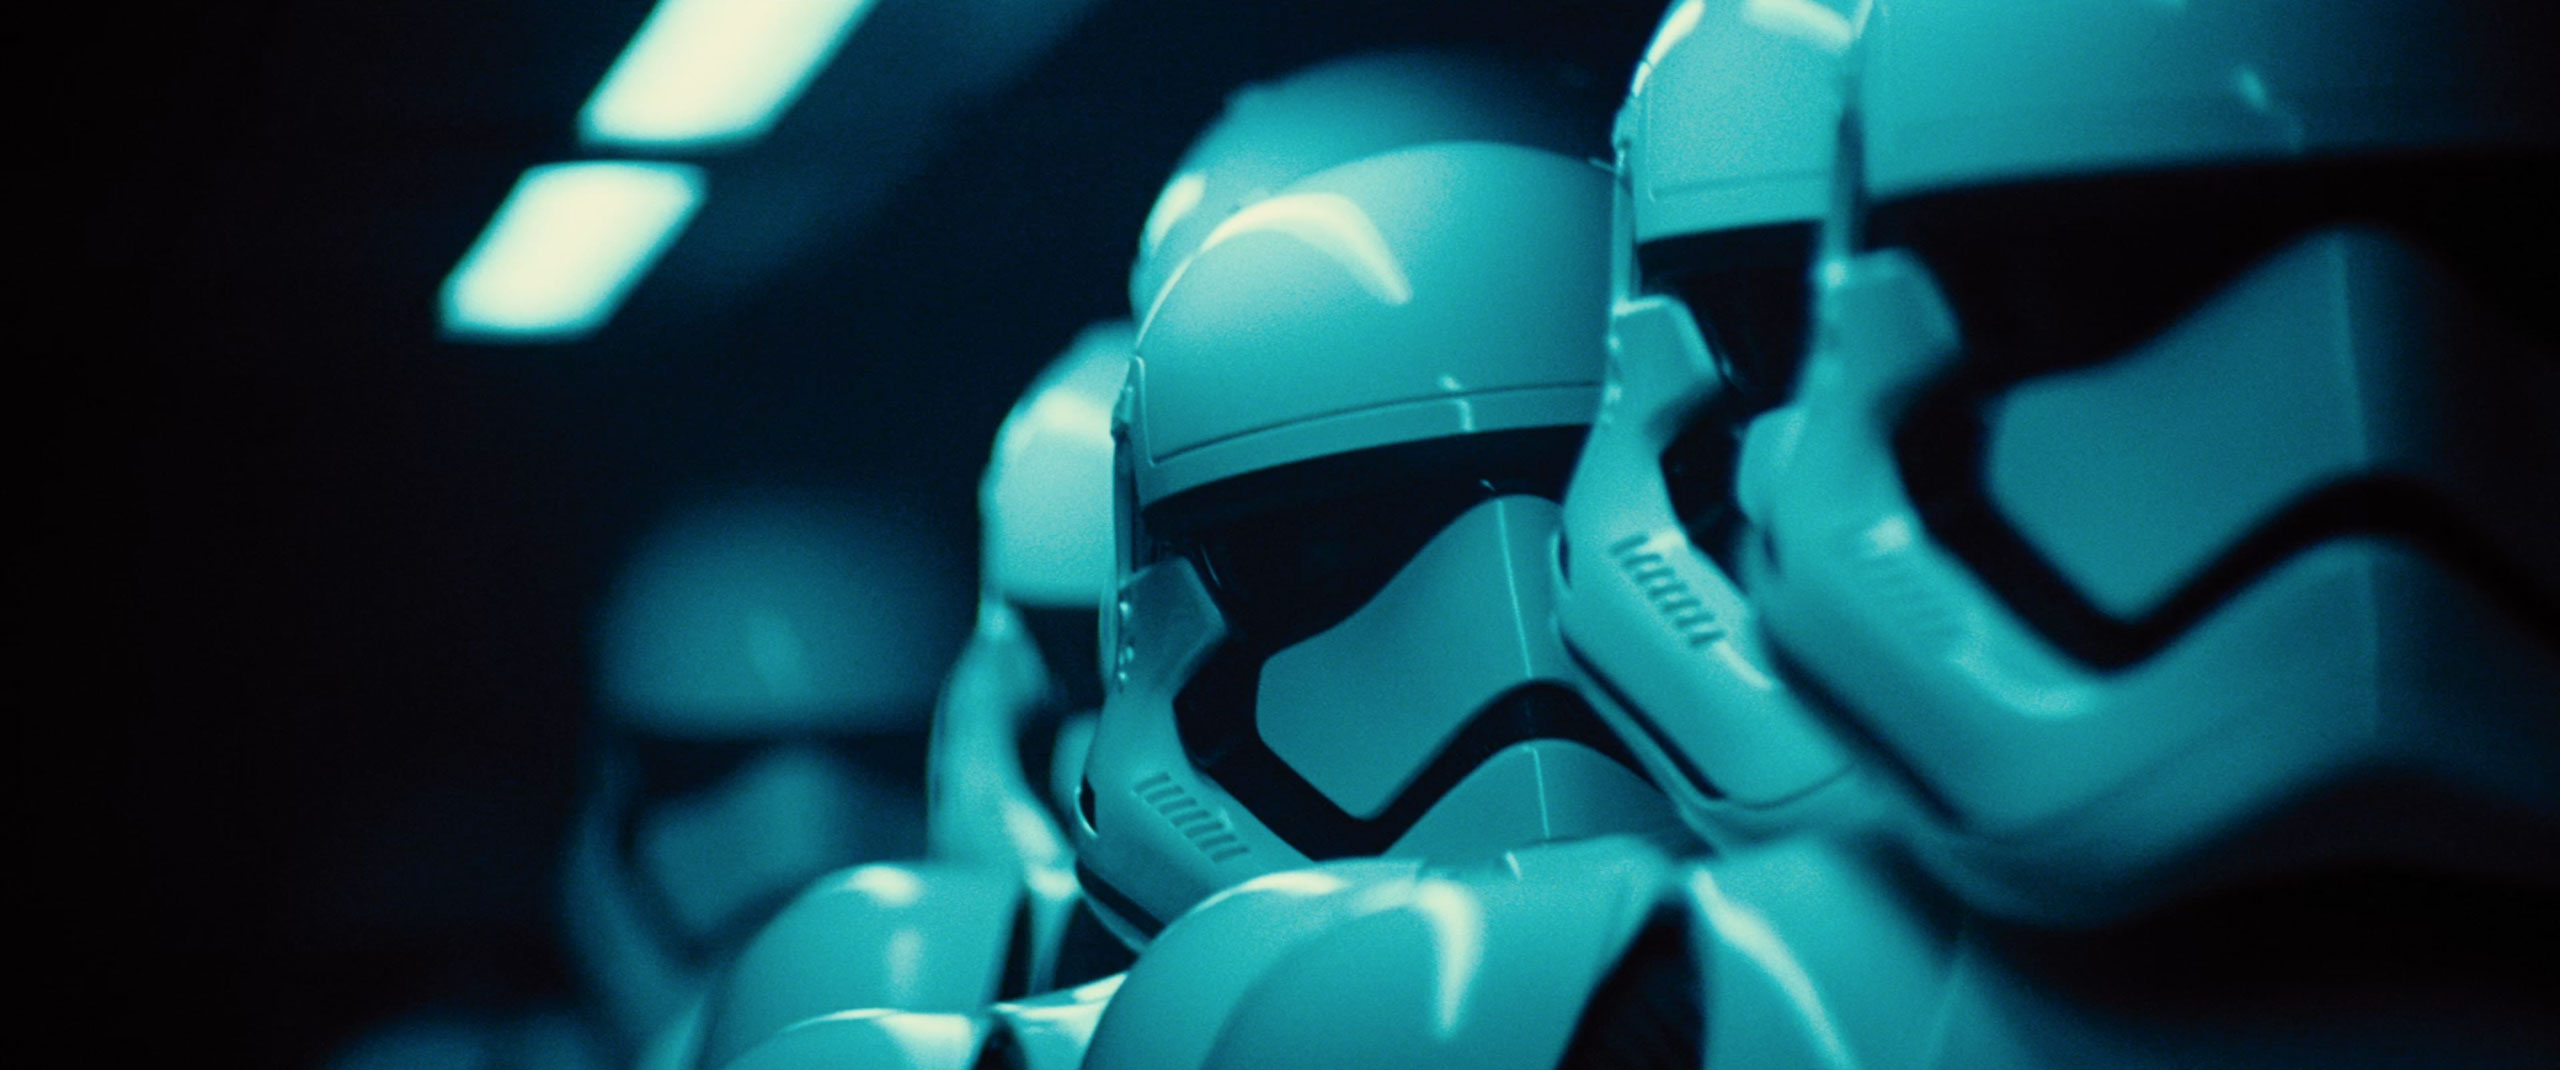 This Force Awakens Stormtrooper Figure Might Be Our First Star Wars Comic-Con Exclusive